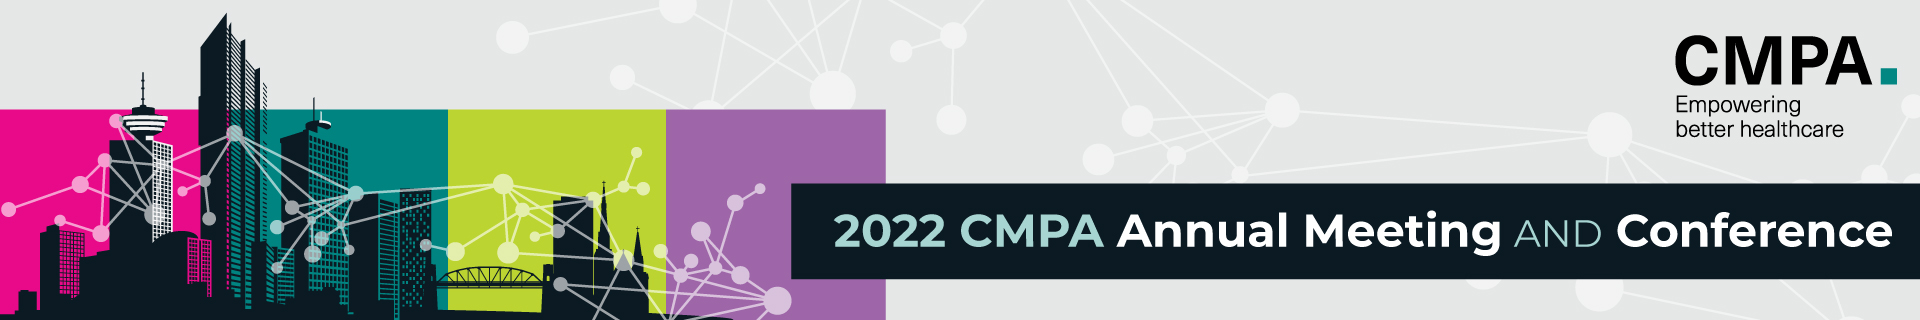 2022 CMPA Annual Meeting and Conference